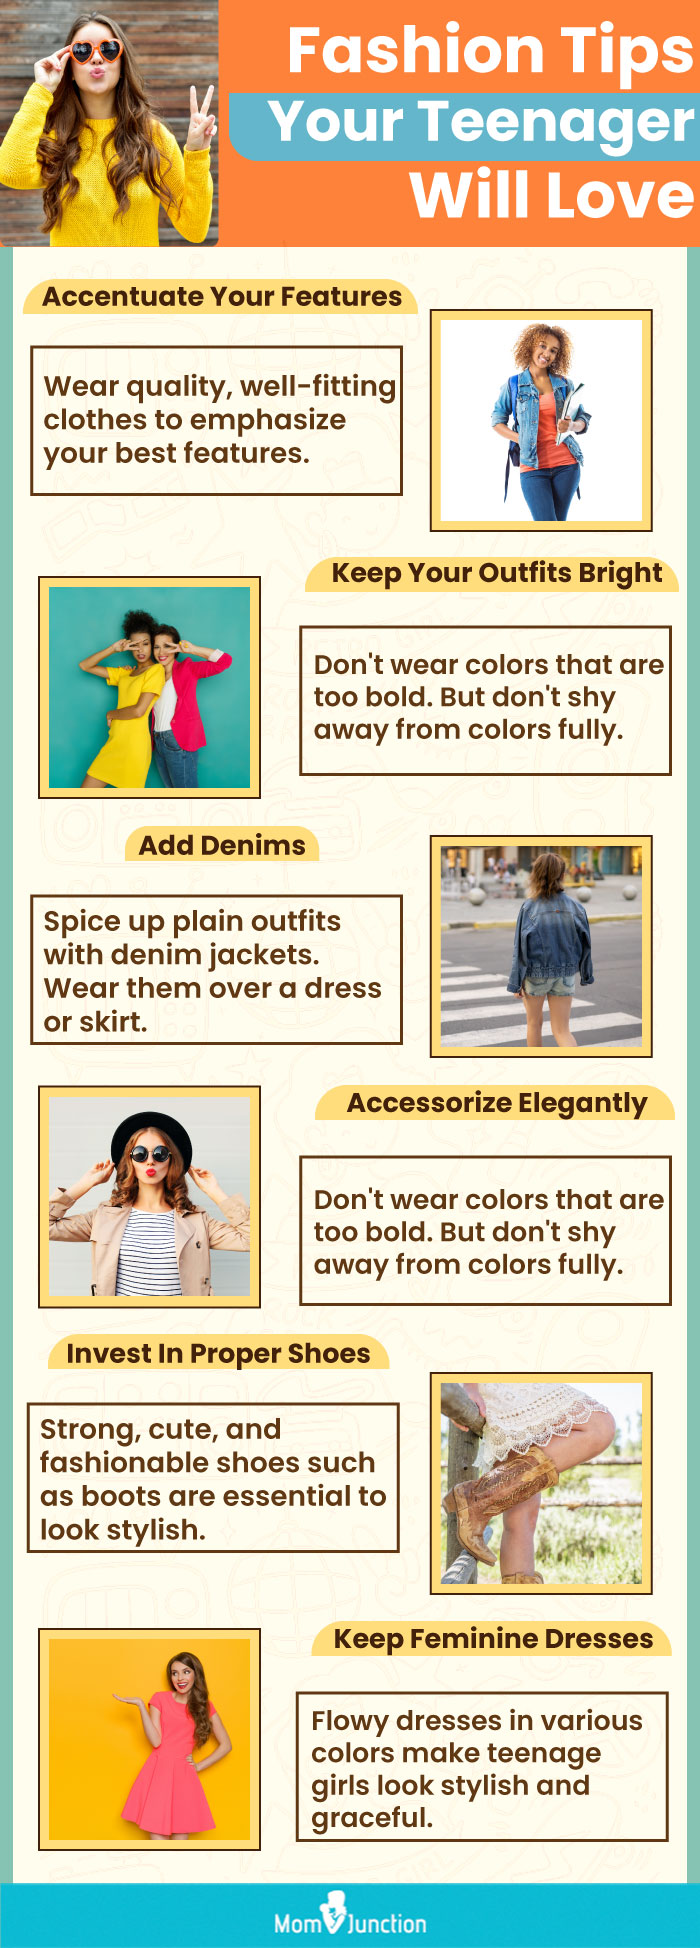 fashion tips your teenage will love (infographic)